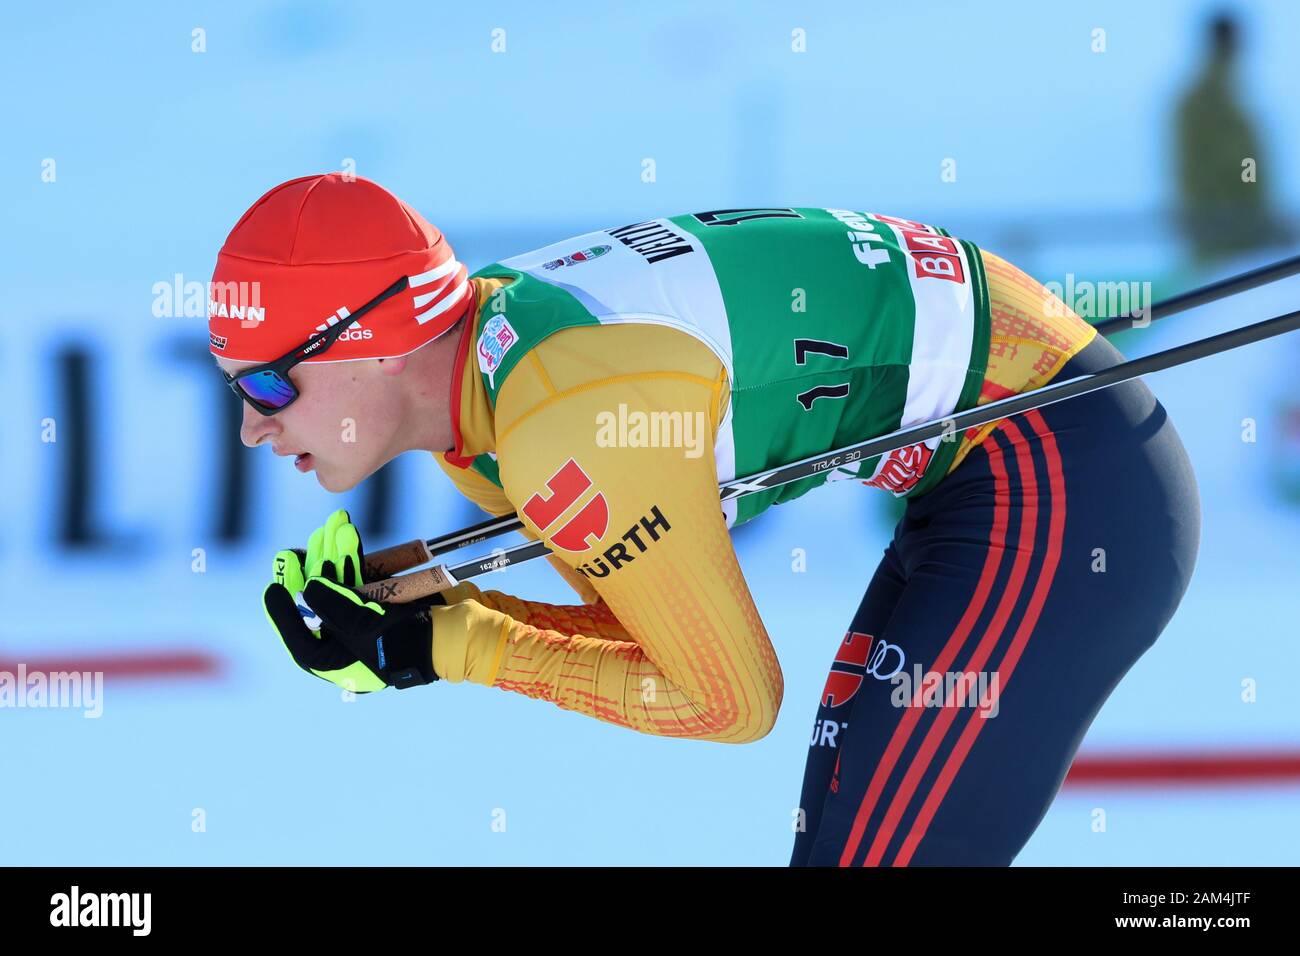 Trento, Italy. 11th January 2020; Lago Di Tesero, Val Di Fiemme, Trento, Italy; International Ski Federation World Cup, FIS Nordic Combined Val Di Fiemme, Fabian Riessle (GER) - Editorial Use Credit: Action Plus Sports Images/Alamy Live News Stock Photo